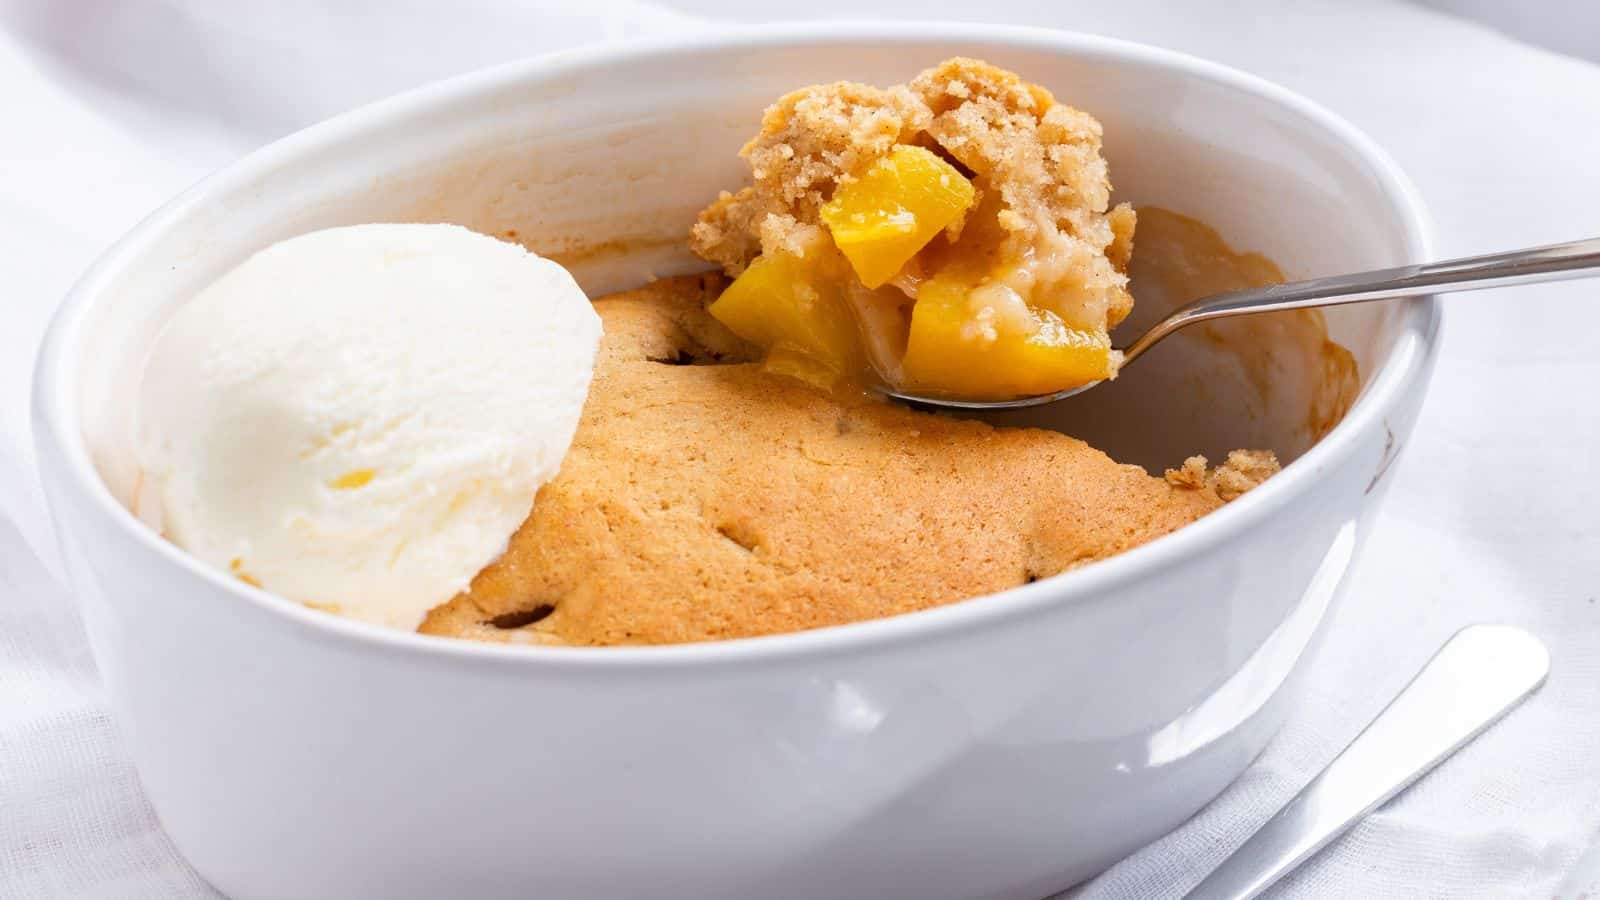 <p>Enjoy the taste of summer with this single-serving peach cobbler. Quick and easy to make, it’s a perfect treat for one. With its warm, fruity filling and buttery topping, it’s a comforting dessert option that’s sure to satisfy your sweet tooth without the need for a full-sized dessert.<br><strong>Get the Recipe: </strong><a href="https://littlebitrecipes.com/peach-cobbler/?utm_source=msn&utm_medium=page&utm_campaign=msn">Single-Serving Peach Cobbler</a></p>